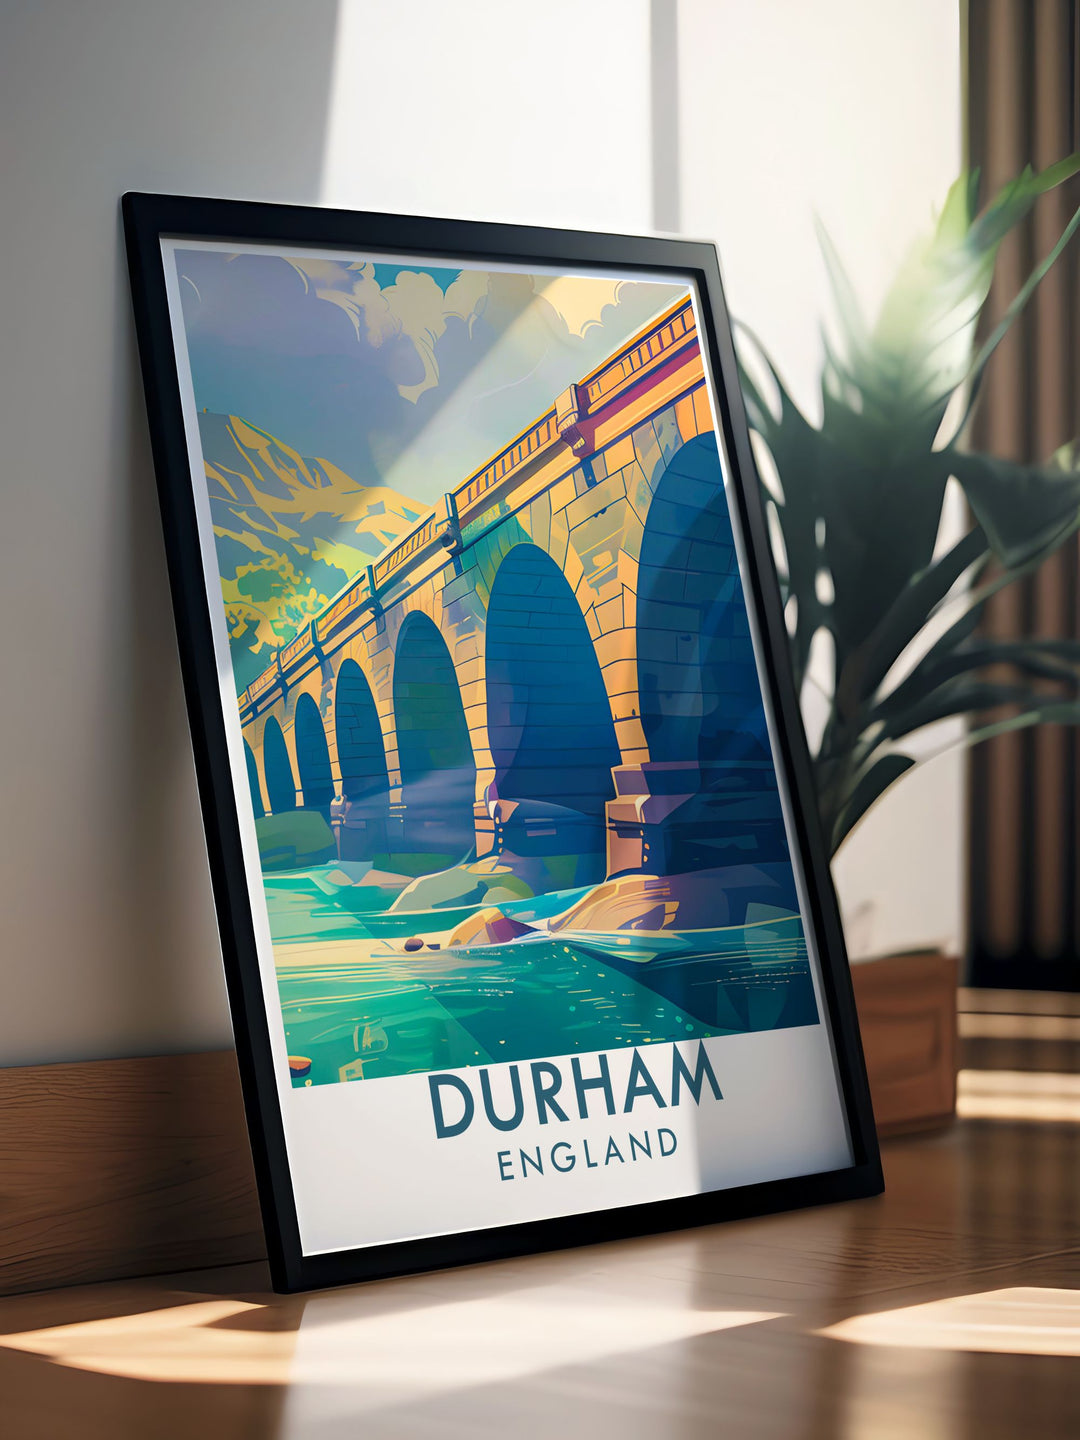 The natural beauty of Durham and the serene flow of the River Wear are captured in this art print, perfect for adding a touch of Englands charm to your home.